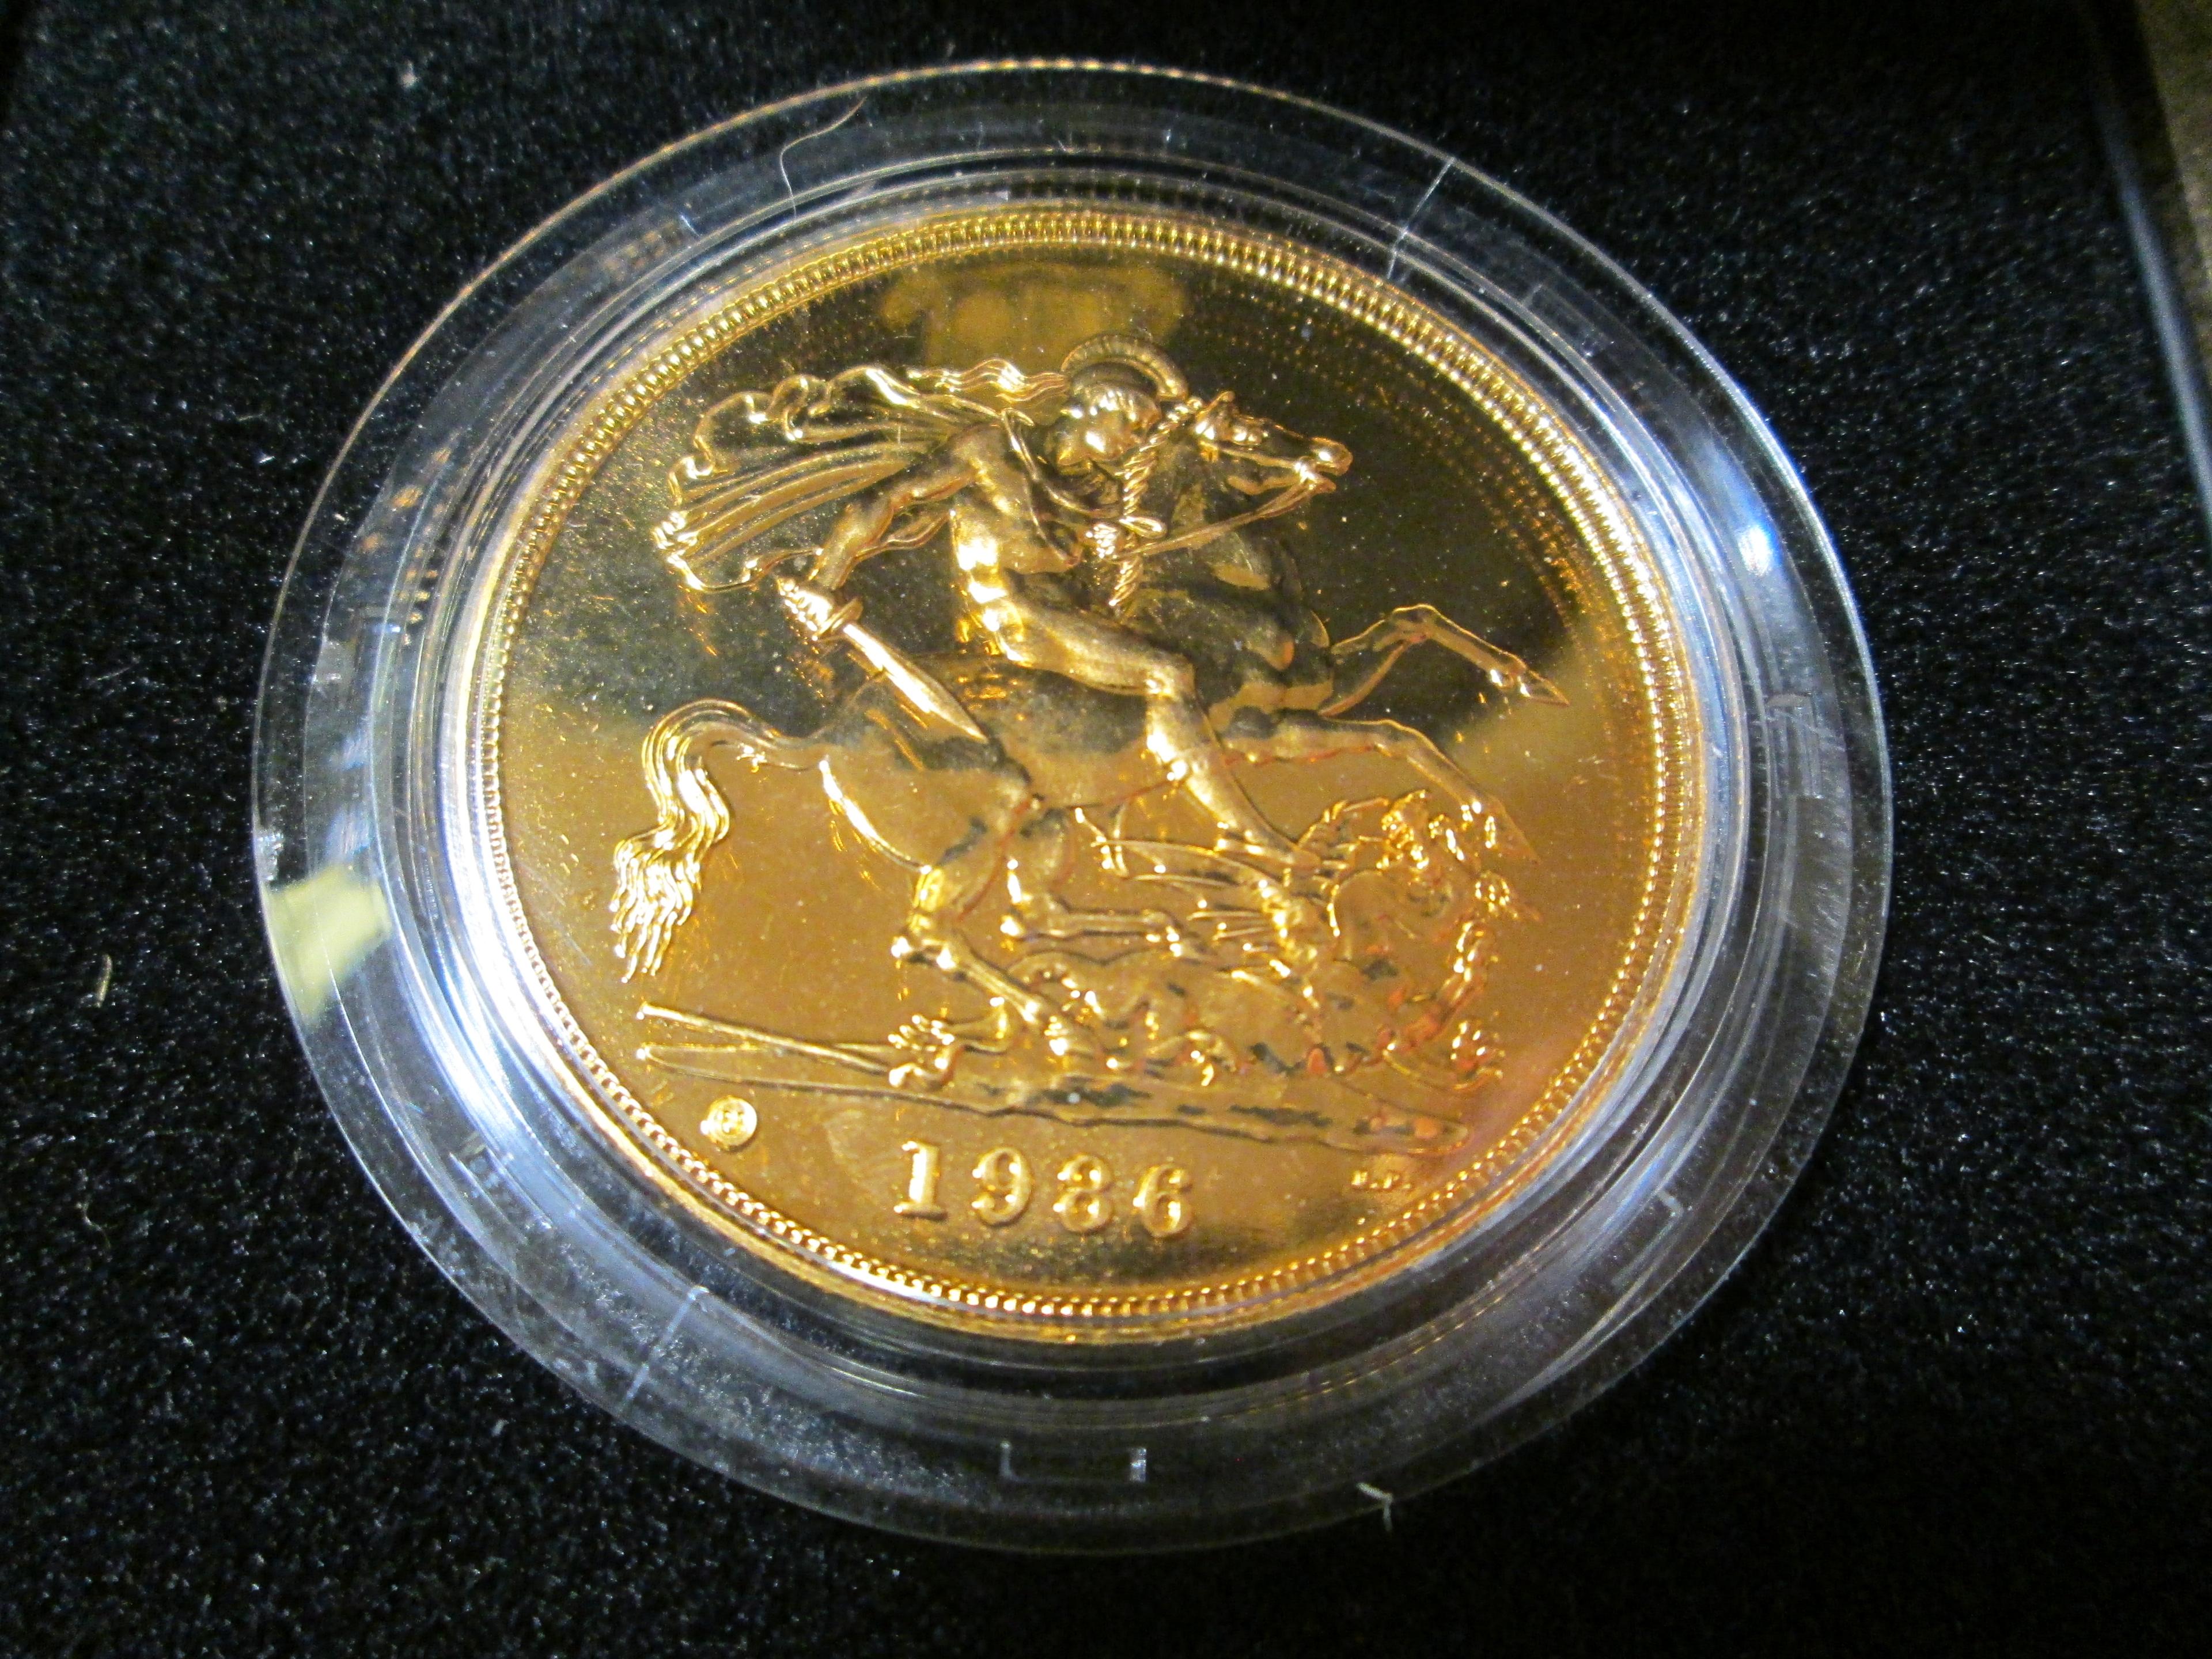 1986 Great Britain Five Pound Gold Coin in original case of issue. Mtg. 7,723 pcs. KM#945. Weighs 39